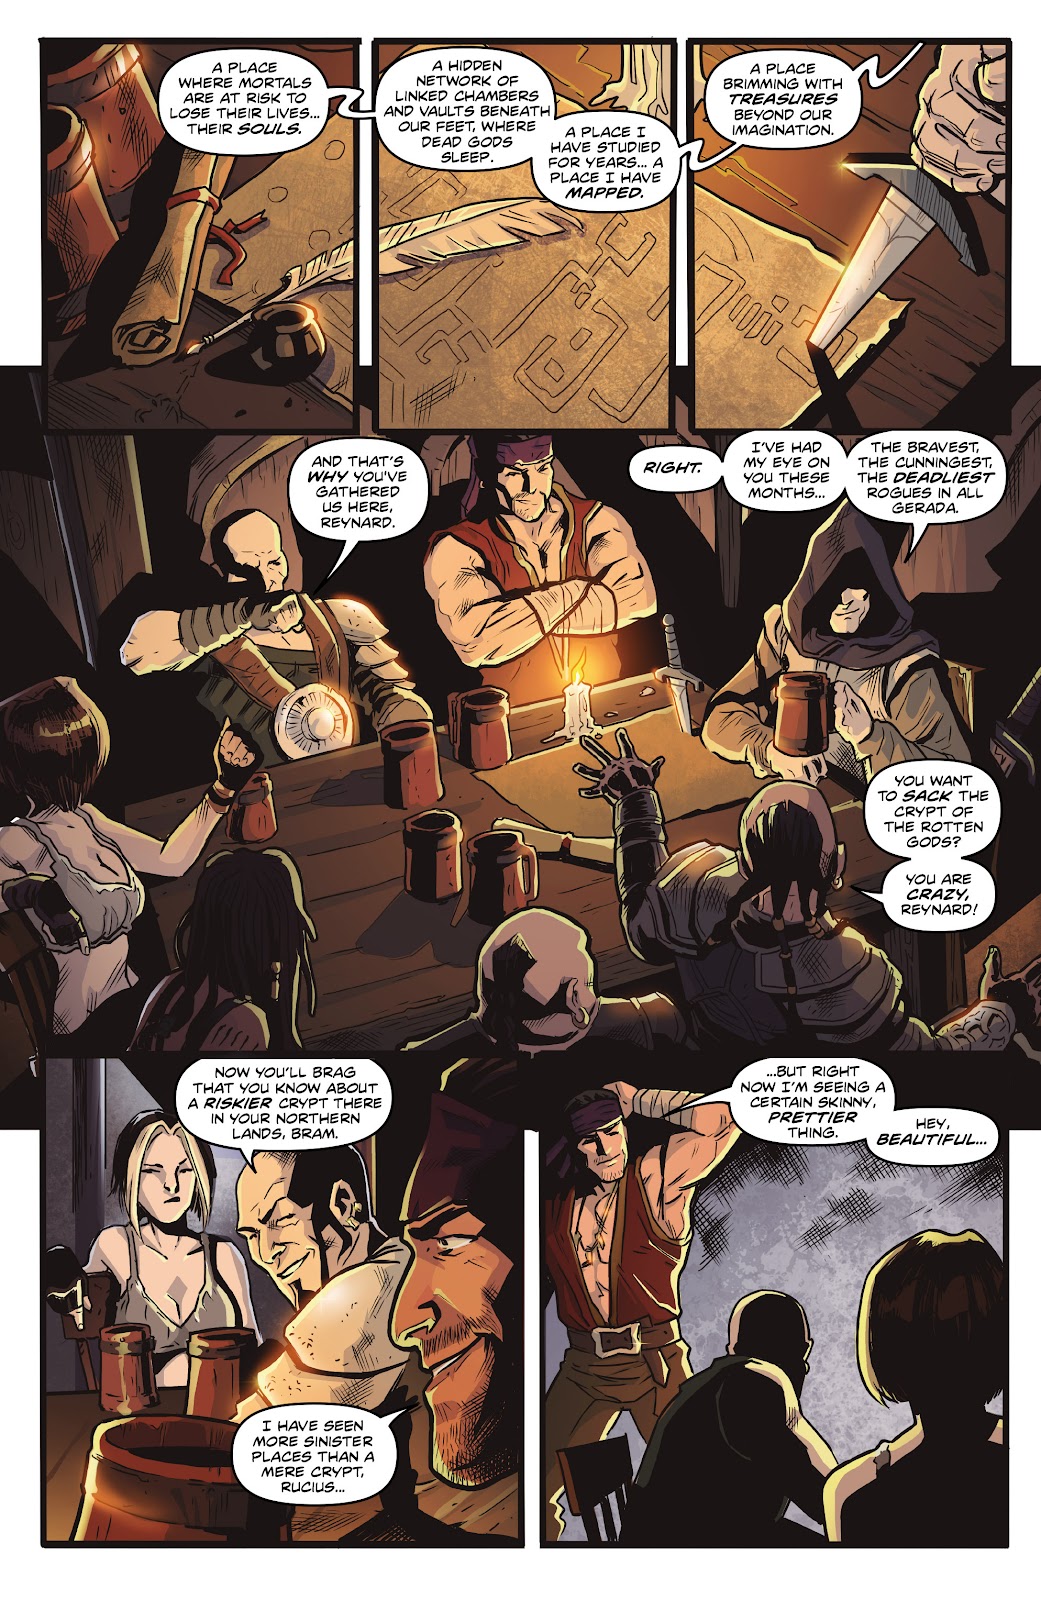 Rogues!: The Burning Heart issue 4 - Page 12